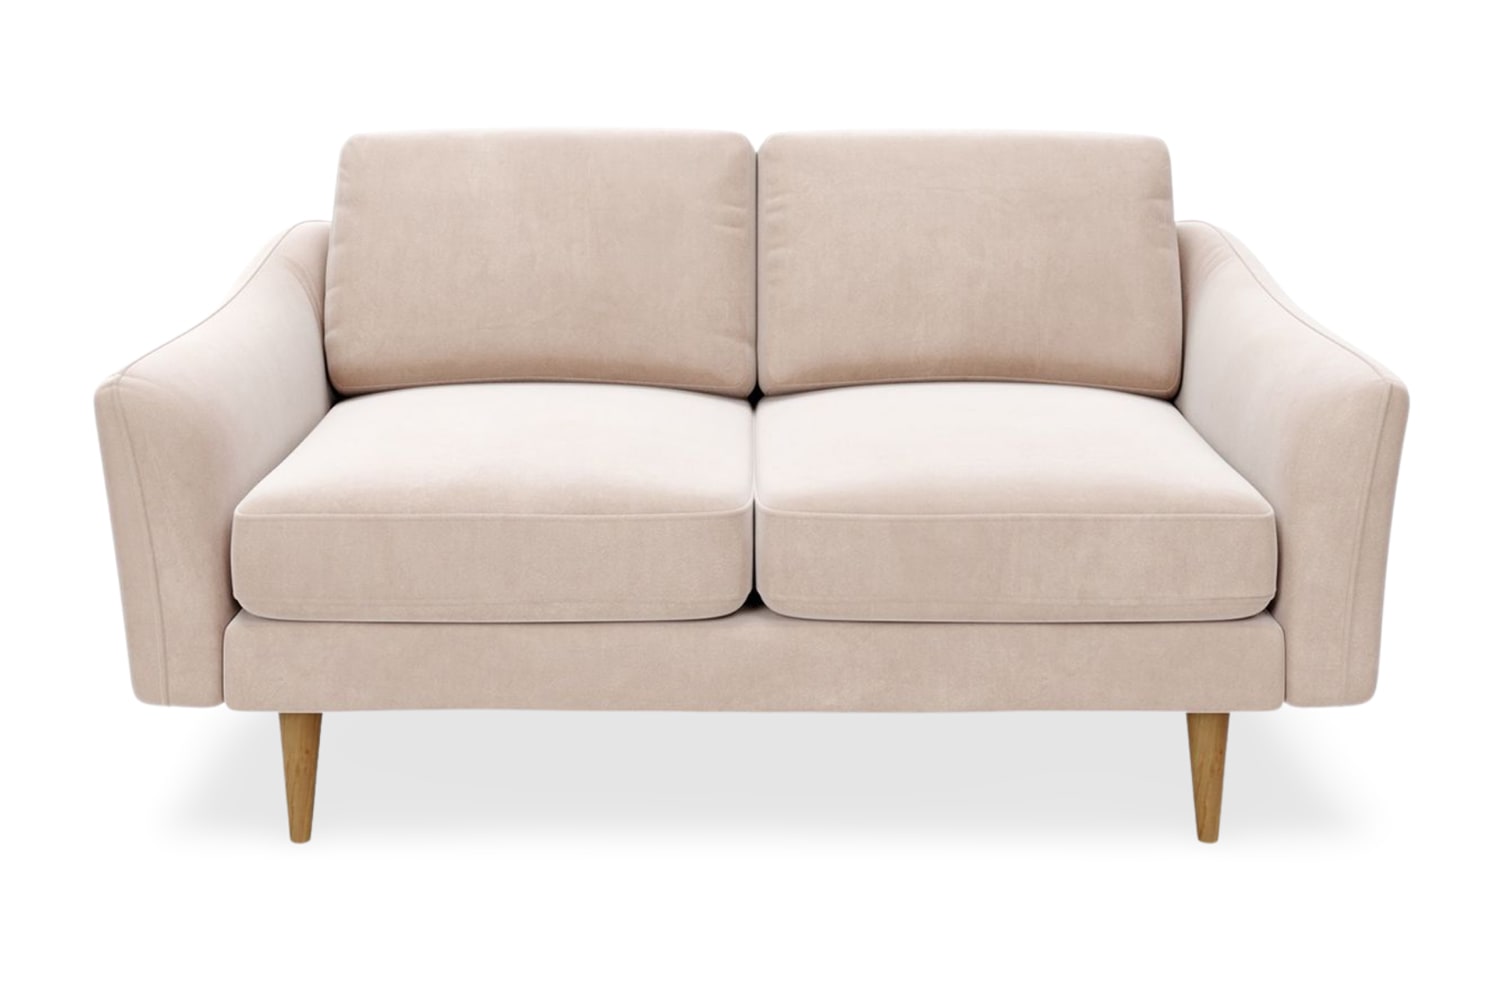 SNUG | The Rebel 2 Seater Sofa in Taupe variant_40414889869360